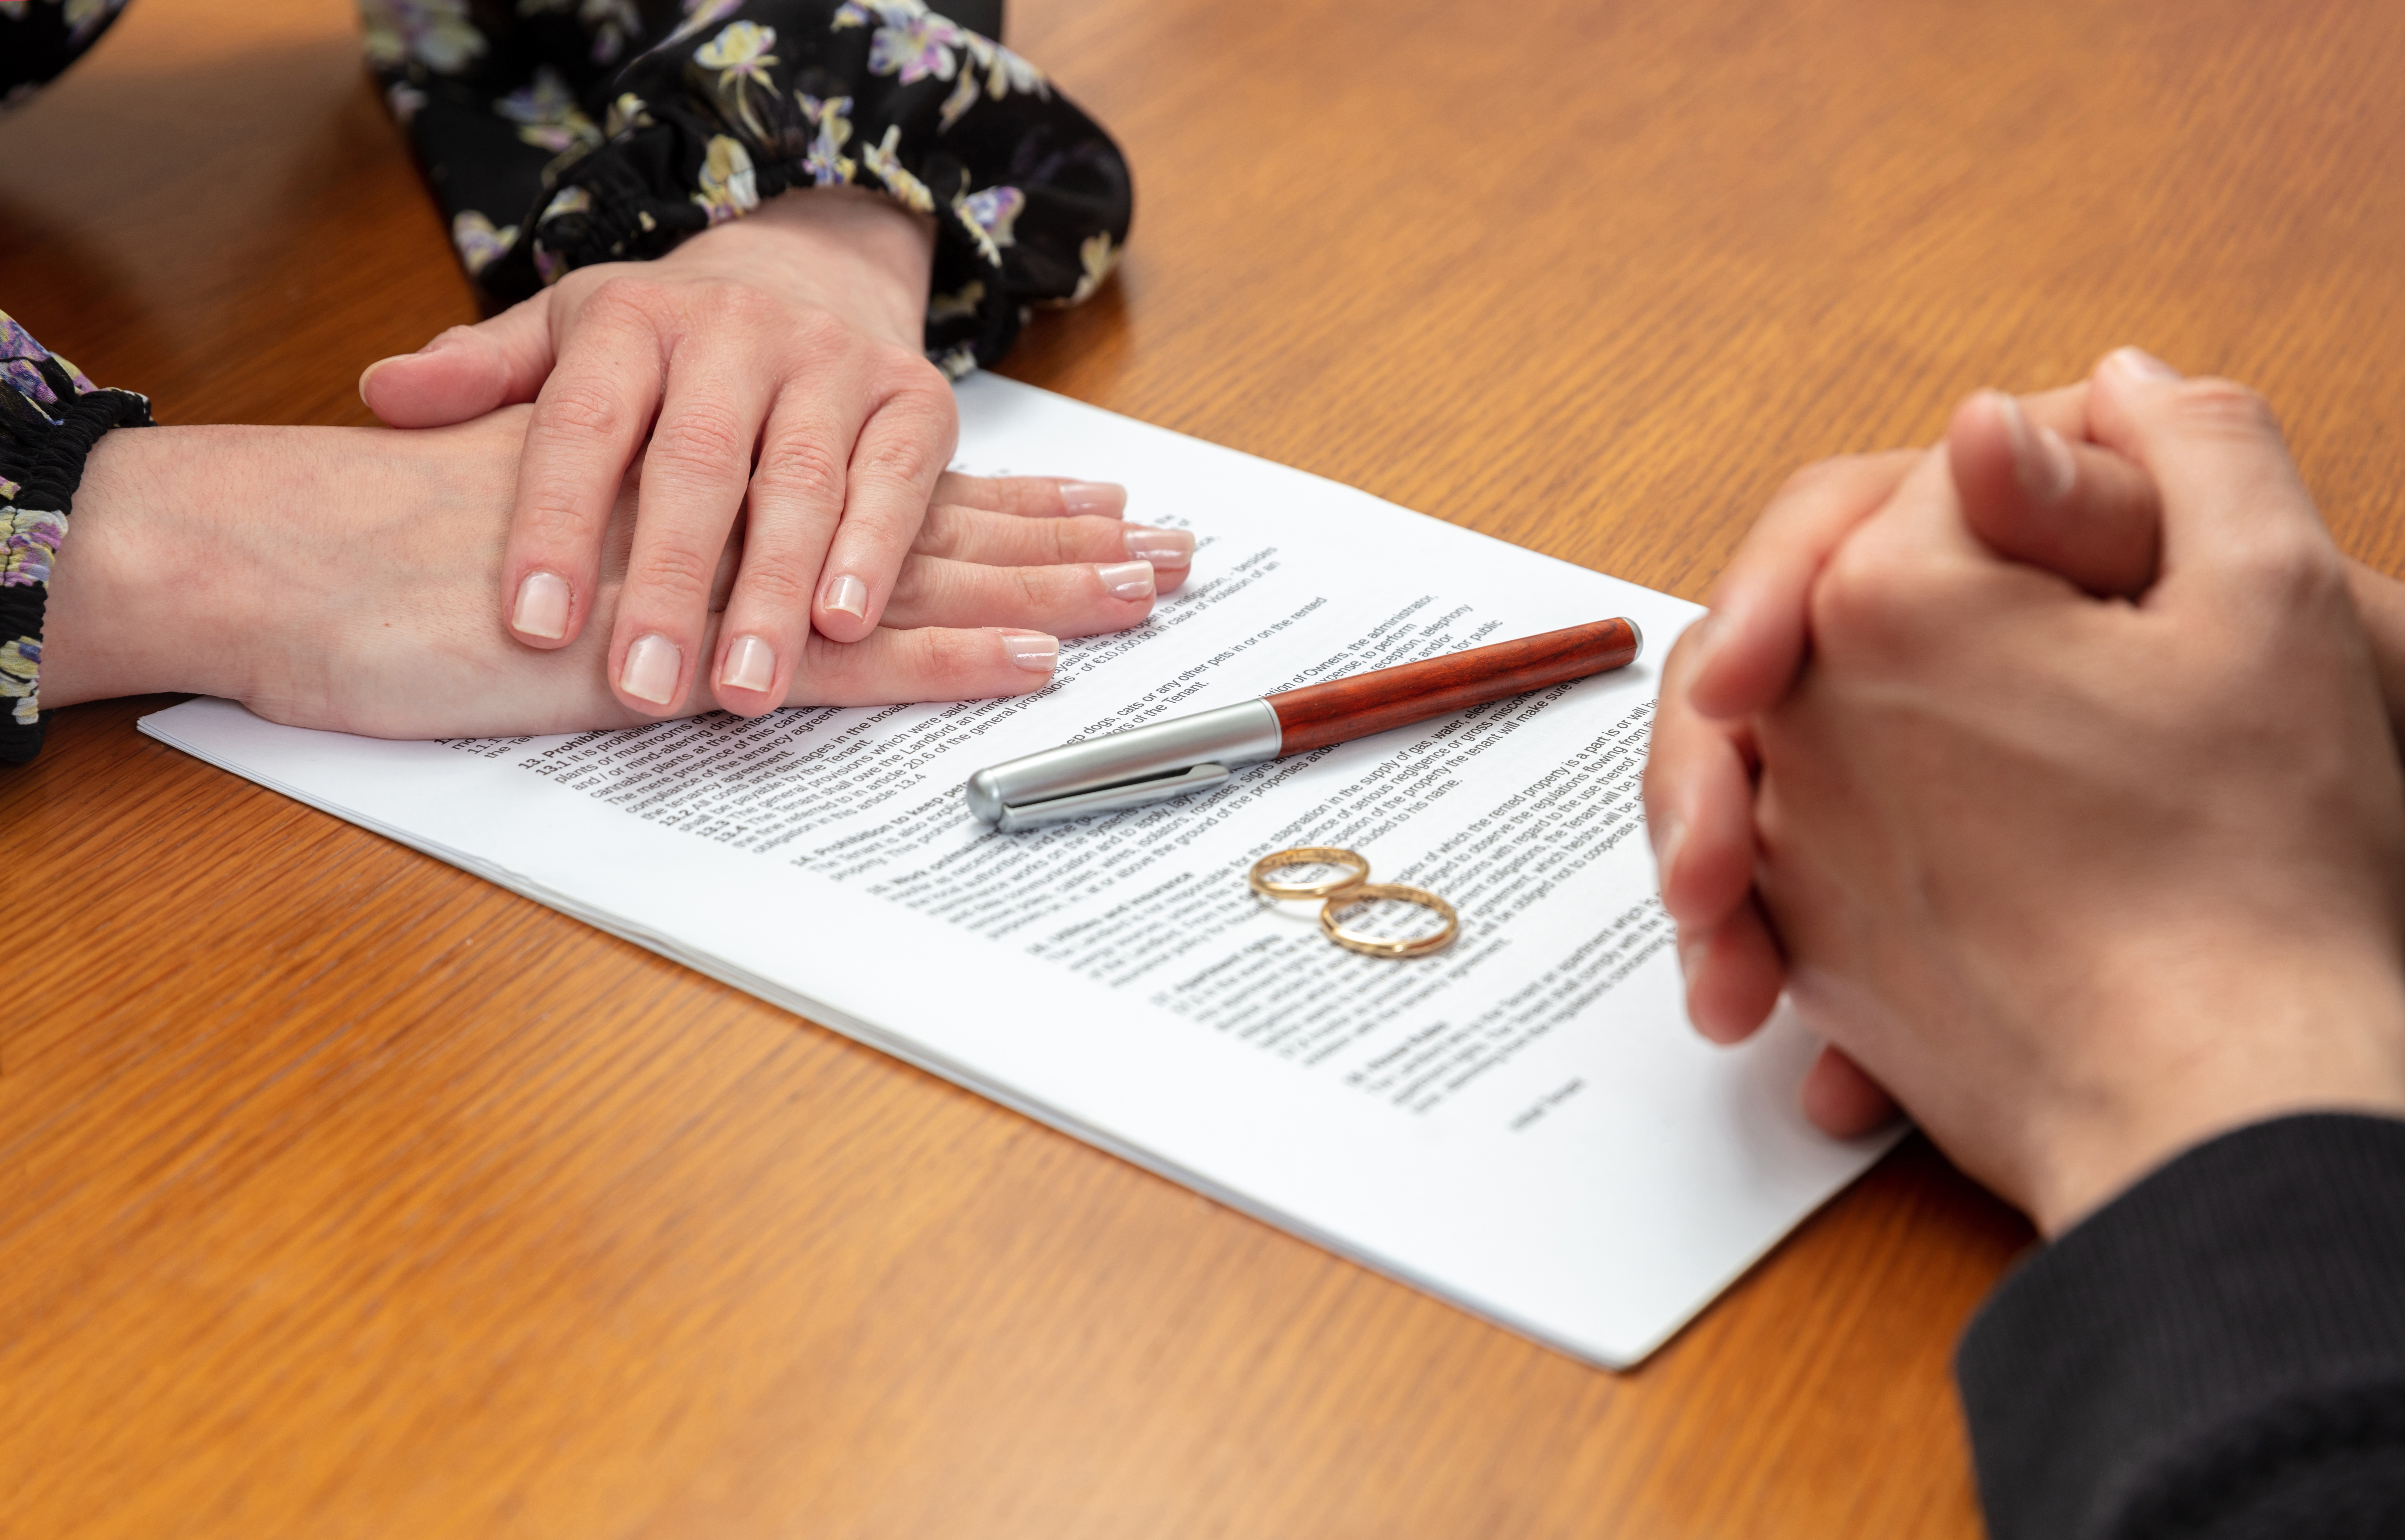 Divorce signature, marriage dissolution document. Wedding ring and agreement on lawyer office table